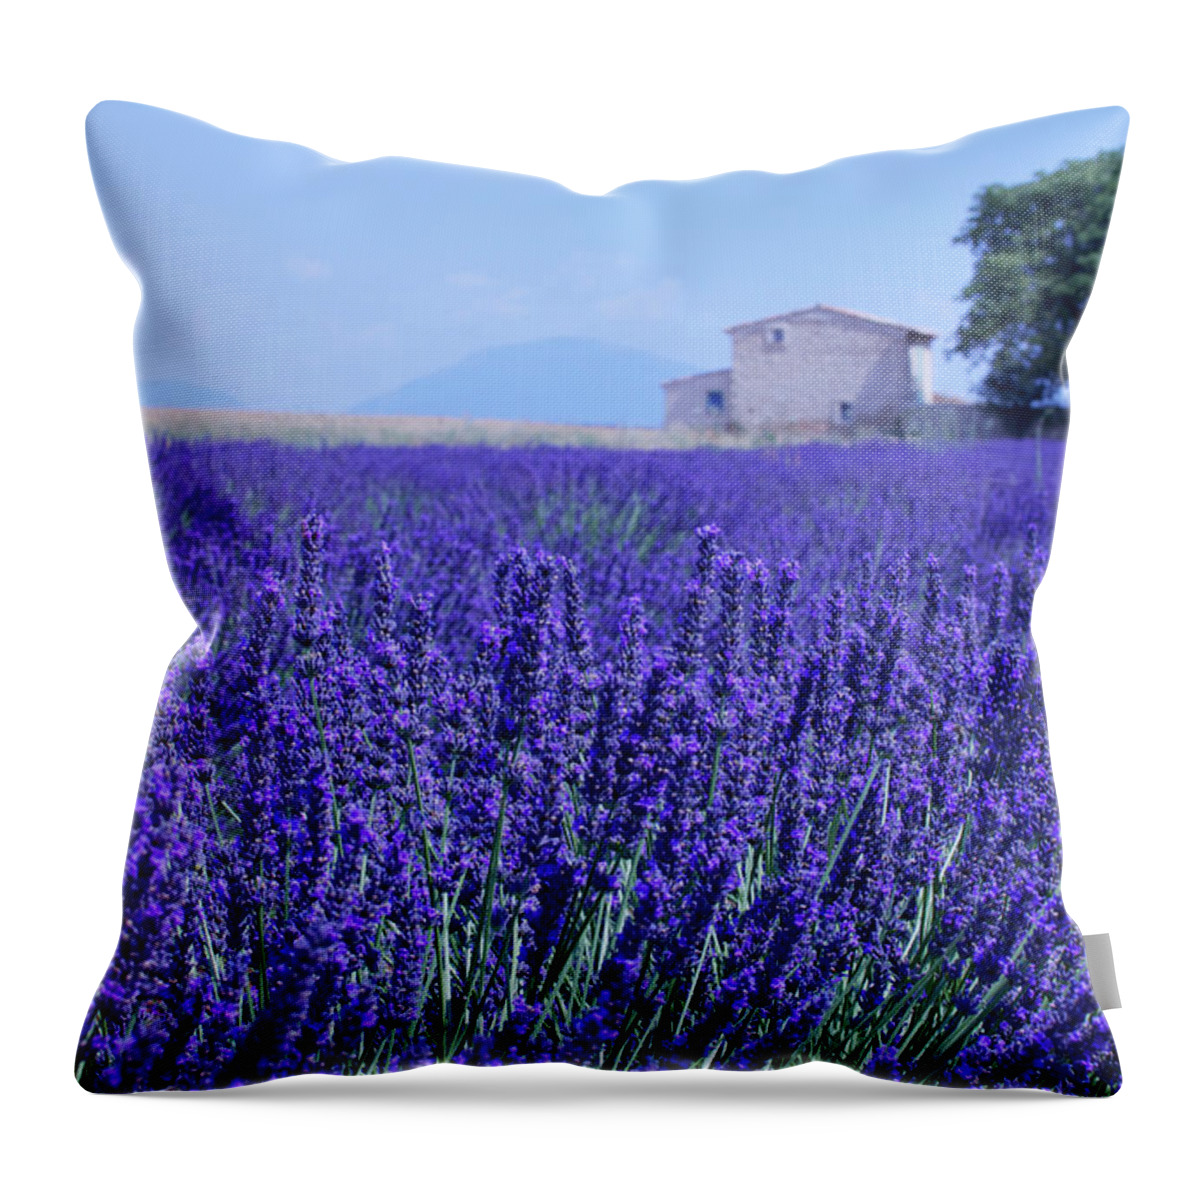 Tranquility Throw Pillow featuring the photograph Lavender Field Under Threat by Meriel Lland